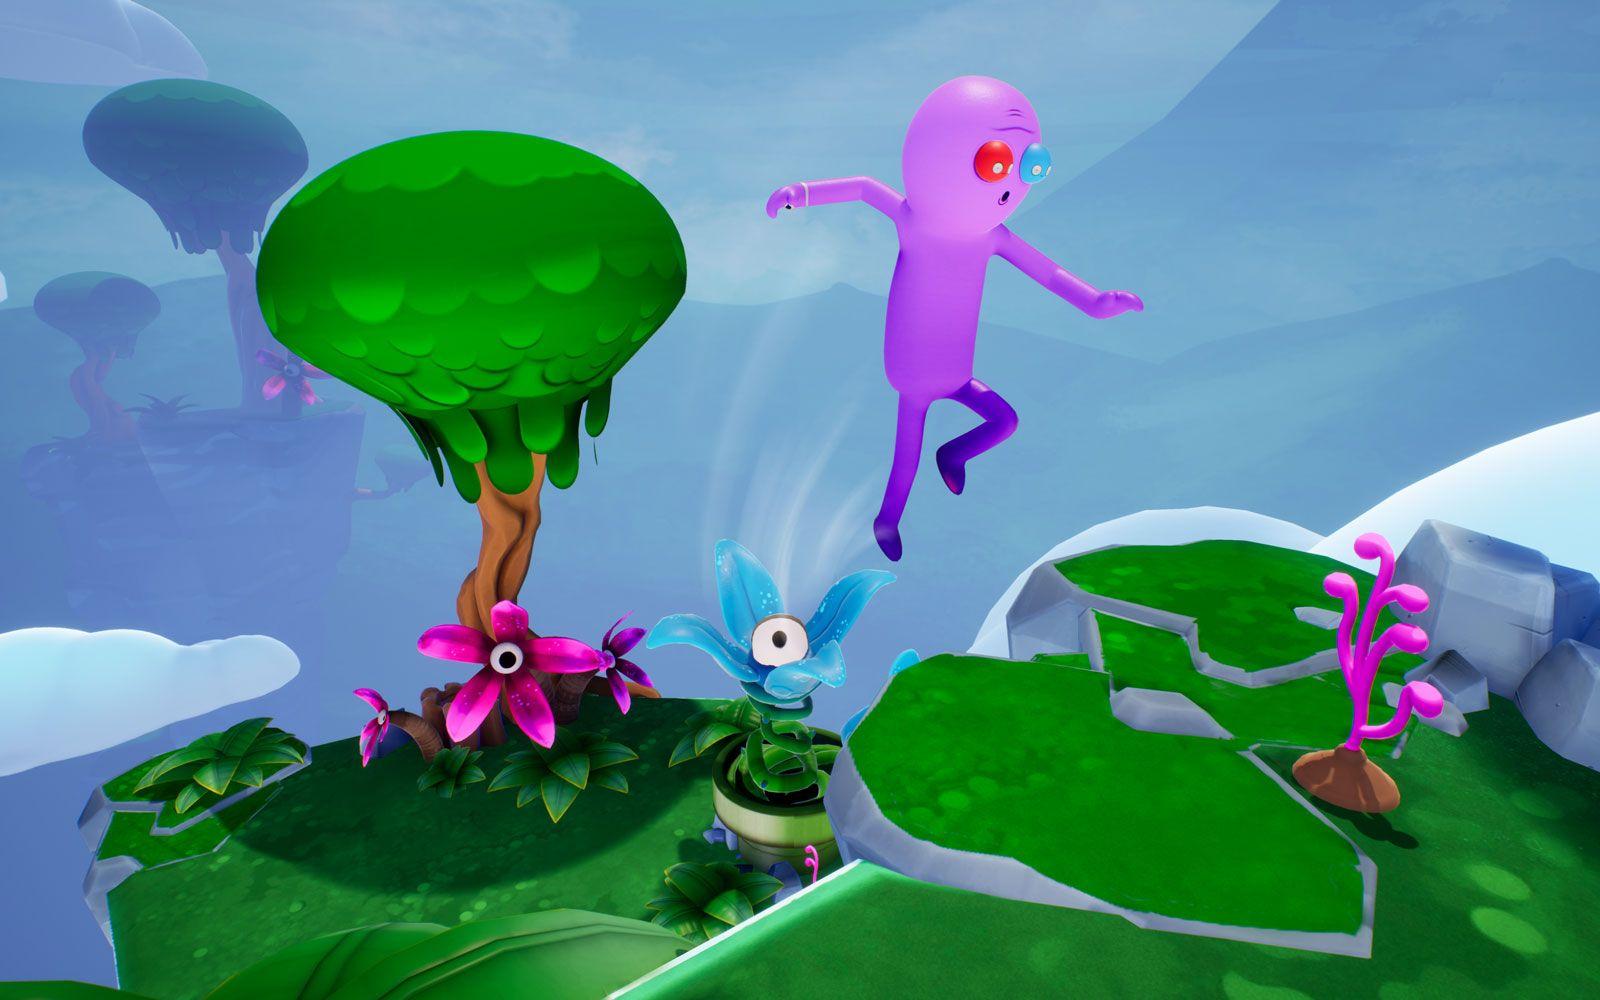 Squanch Games Announces 'Trover Saves the Universe' for PSVR & PS4